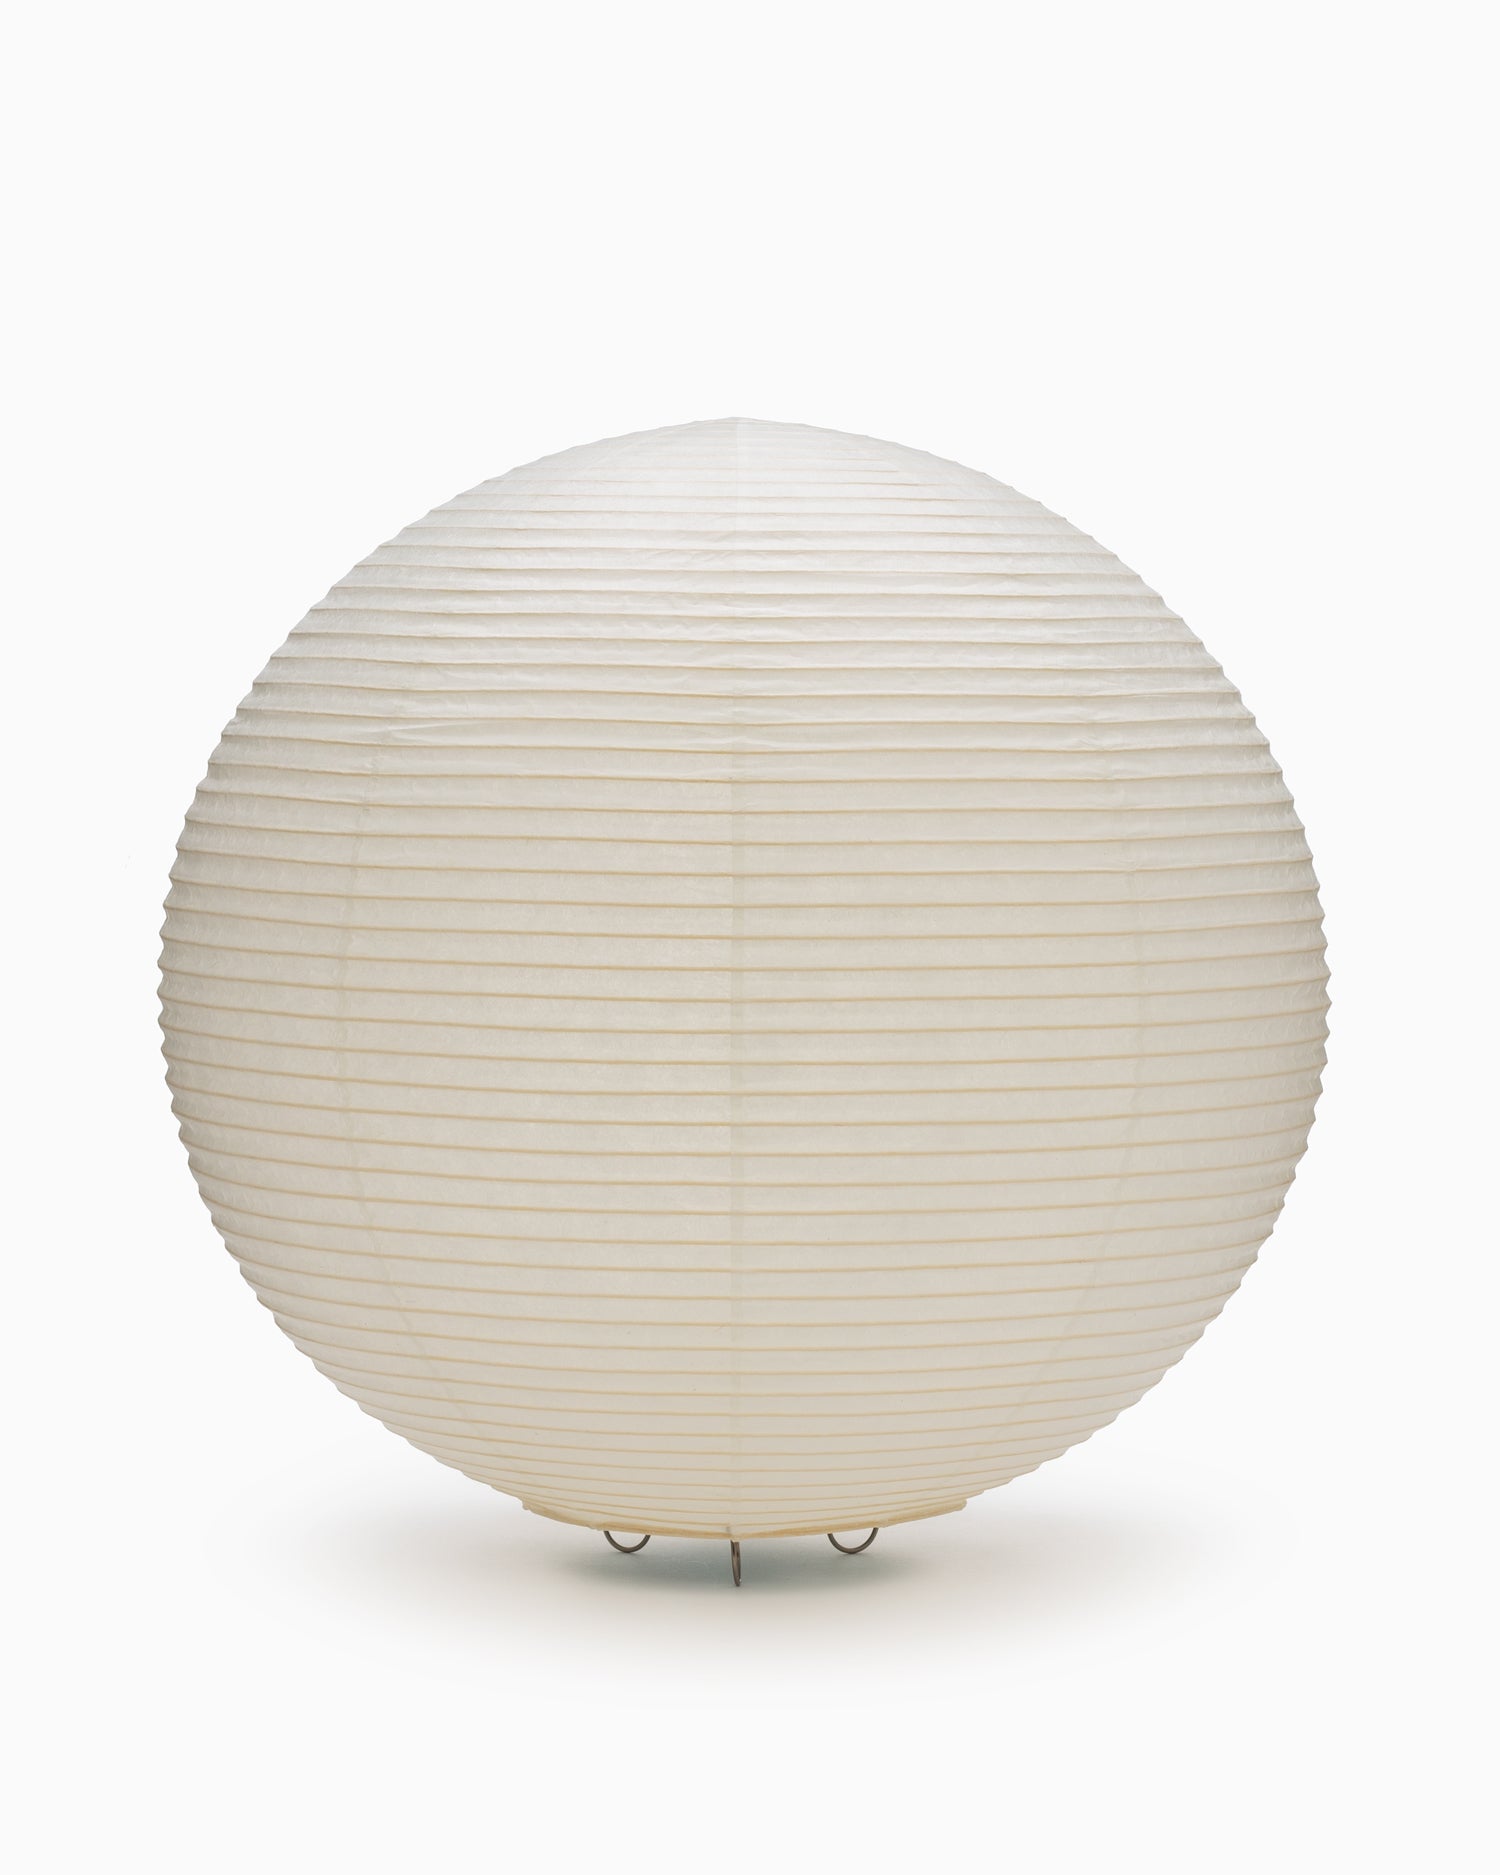 Paper Moon Lamp 05 - The Sphere